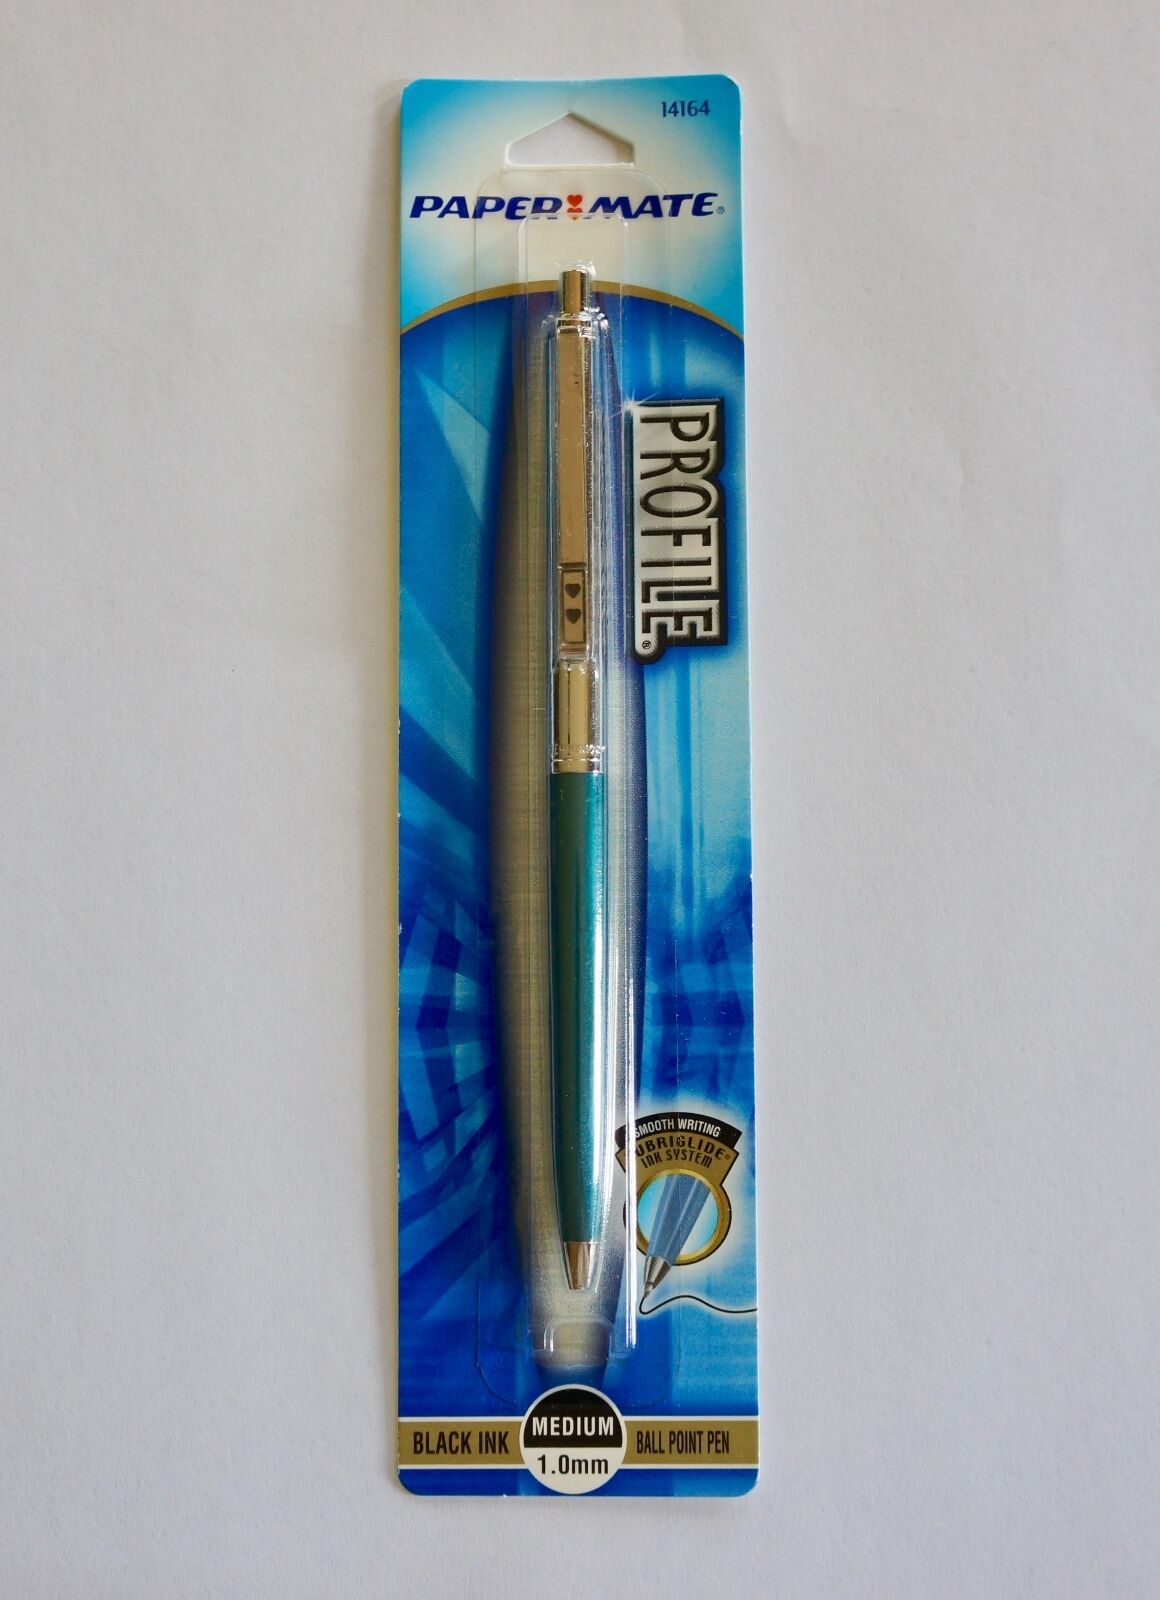 PAPERMATE 14164 PROFILE SLIM PEN TEAL *NEW IN PACKAGE* ,Black Ink,Med Ball Point